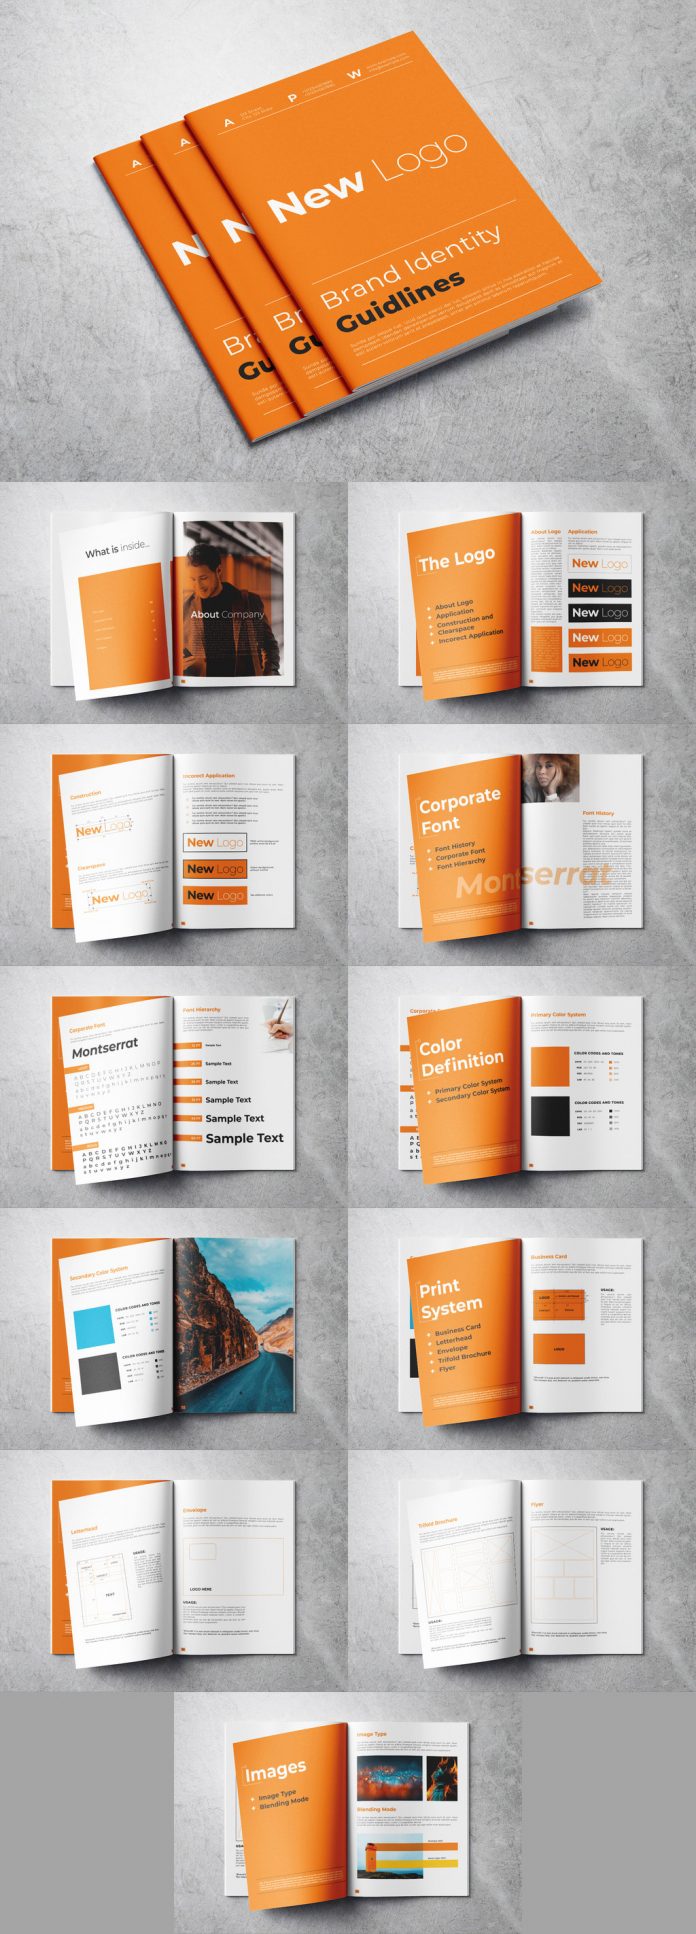 Orange and White Brand Guideline Brochure Template for Adobe InDesign